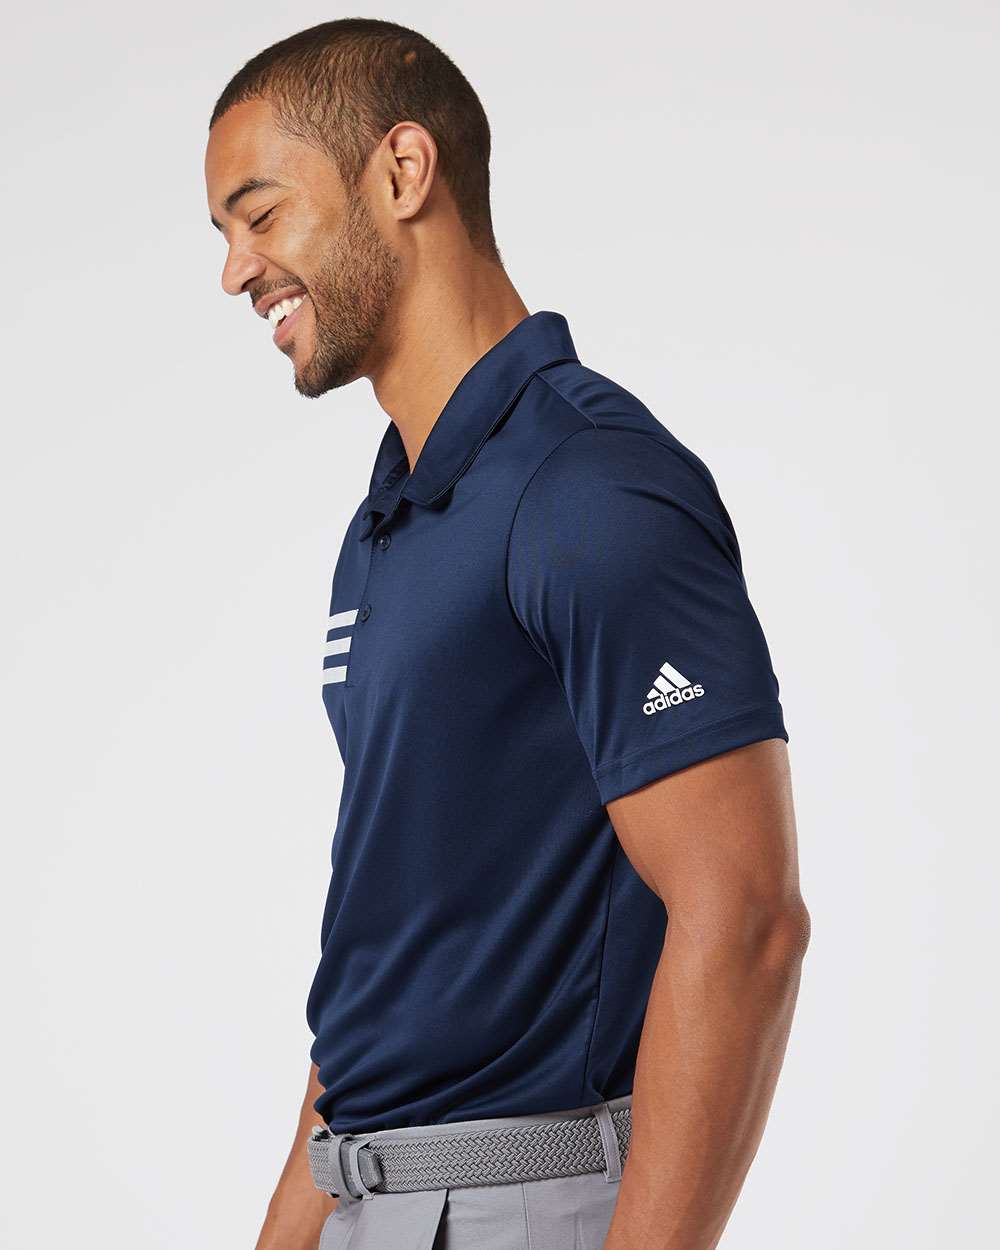 Adidas  A324 3-Stripes Chest Polo Men's T-Shirt #colormdl_Collegiate Navy/ White